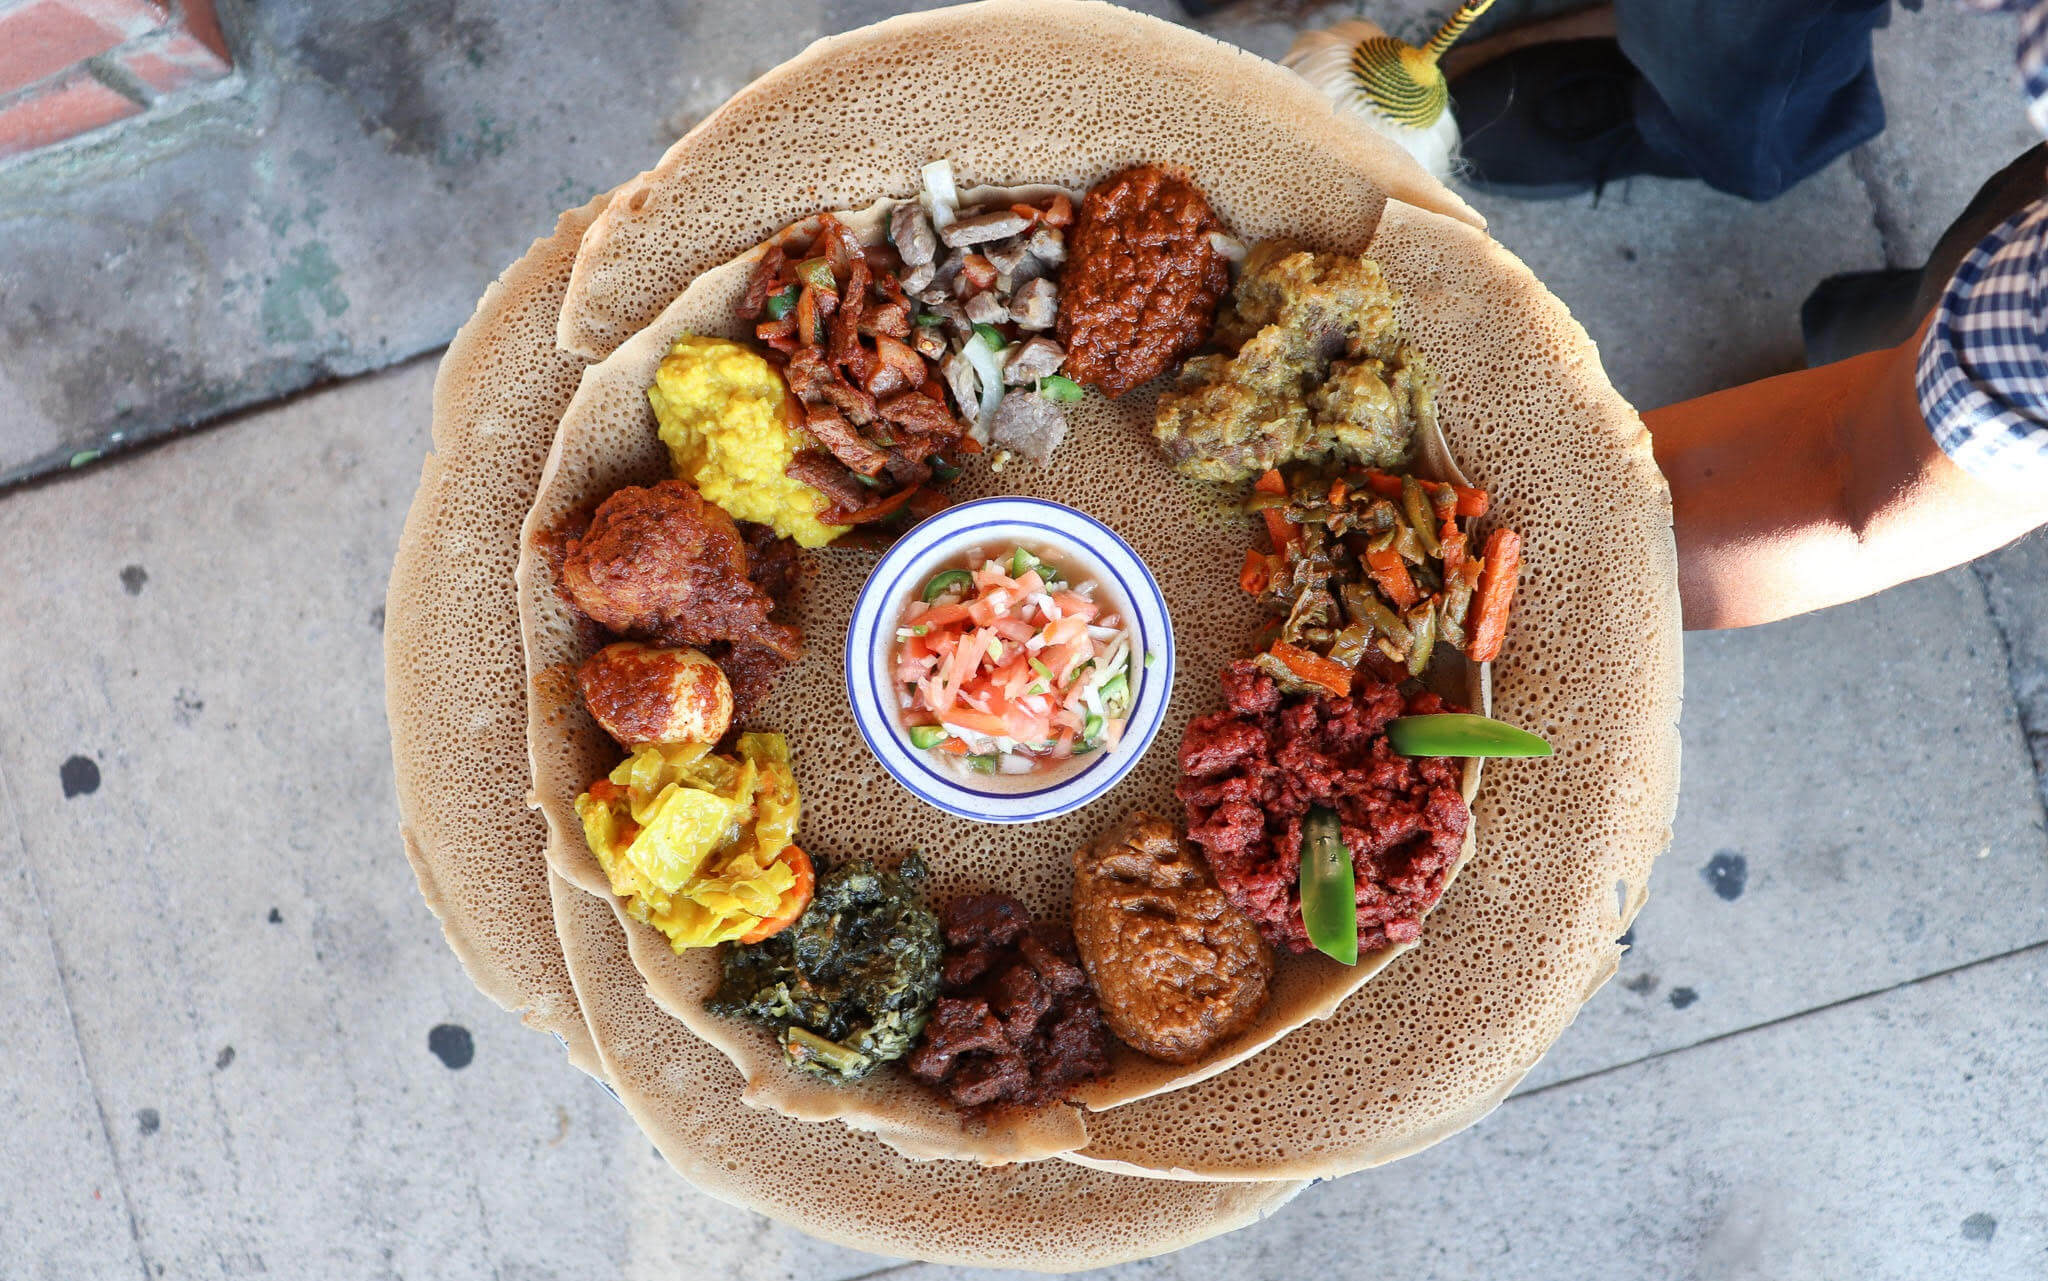 Tradtional ethiopian dish with injera from Rosalind's, an Ethiopian restaurant in Los Angeles. (May 2020)